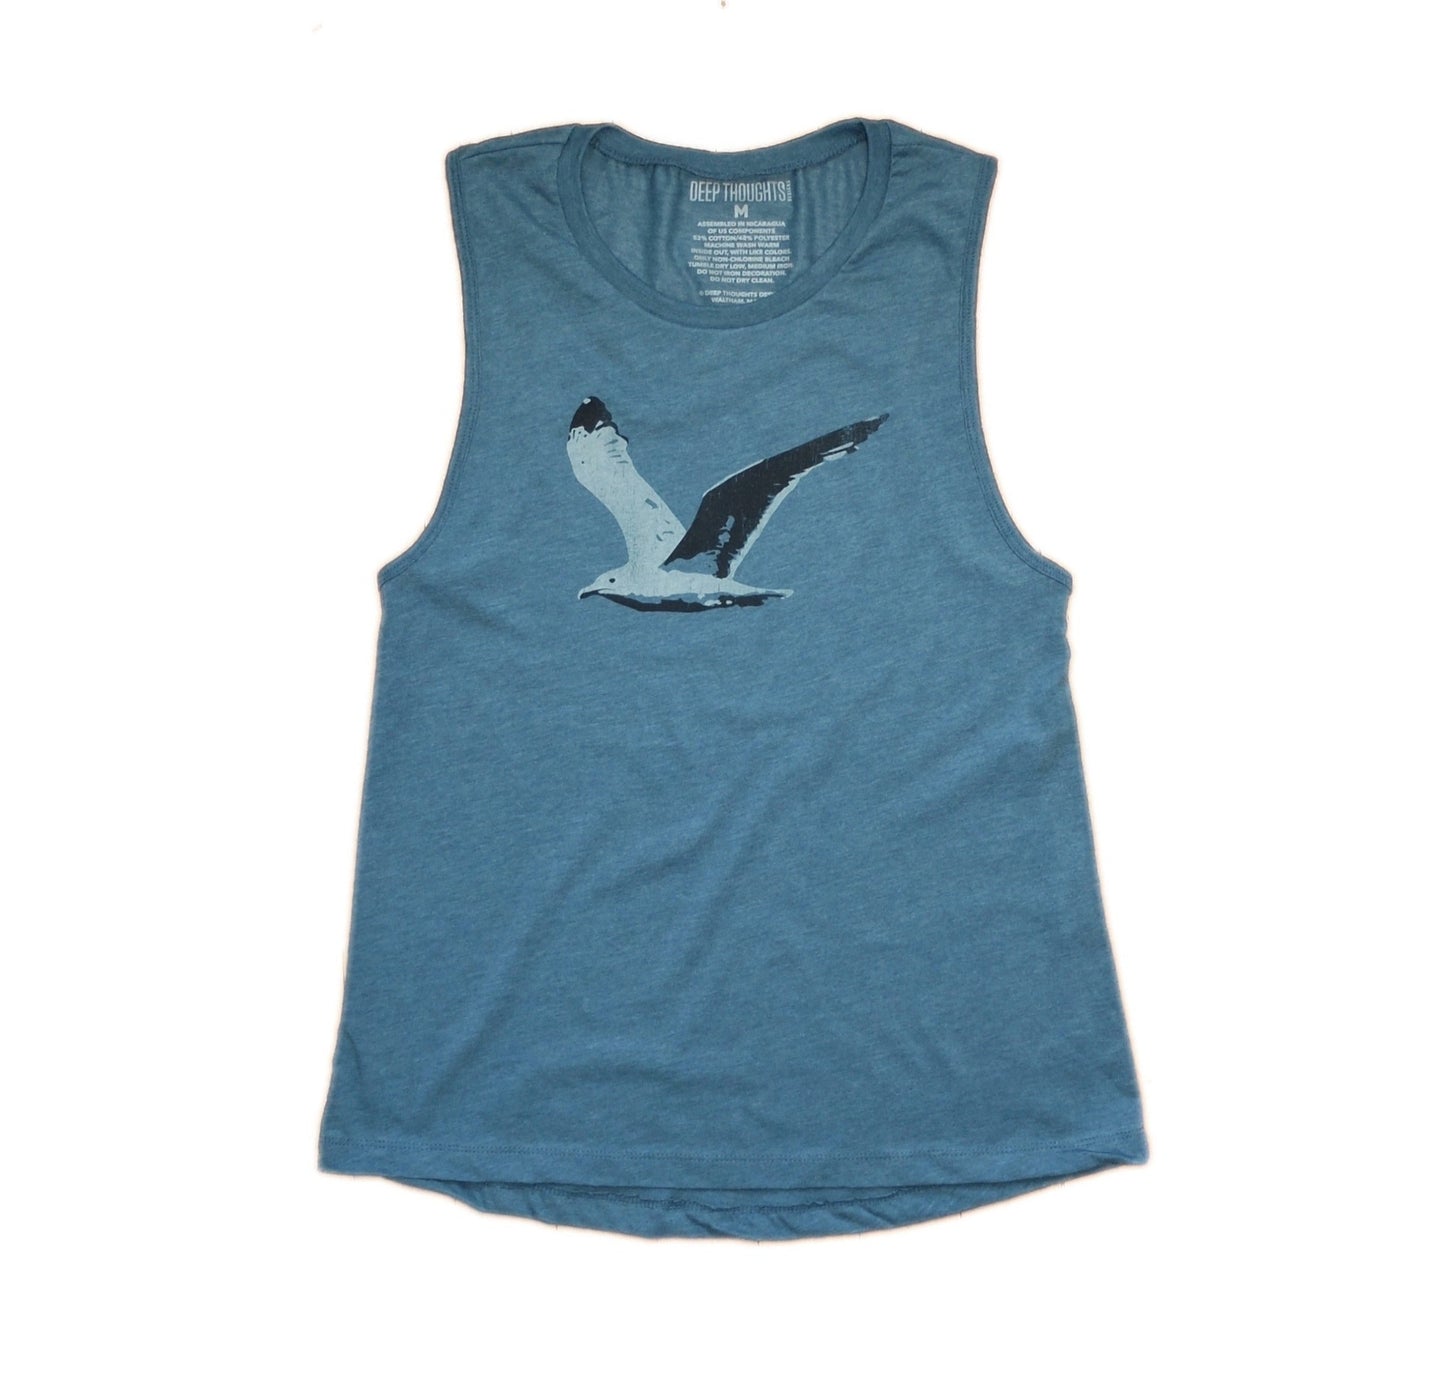 women's heather teal tank top with white and black flying seagull graphic